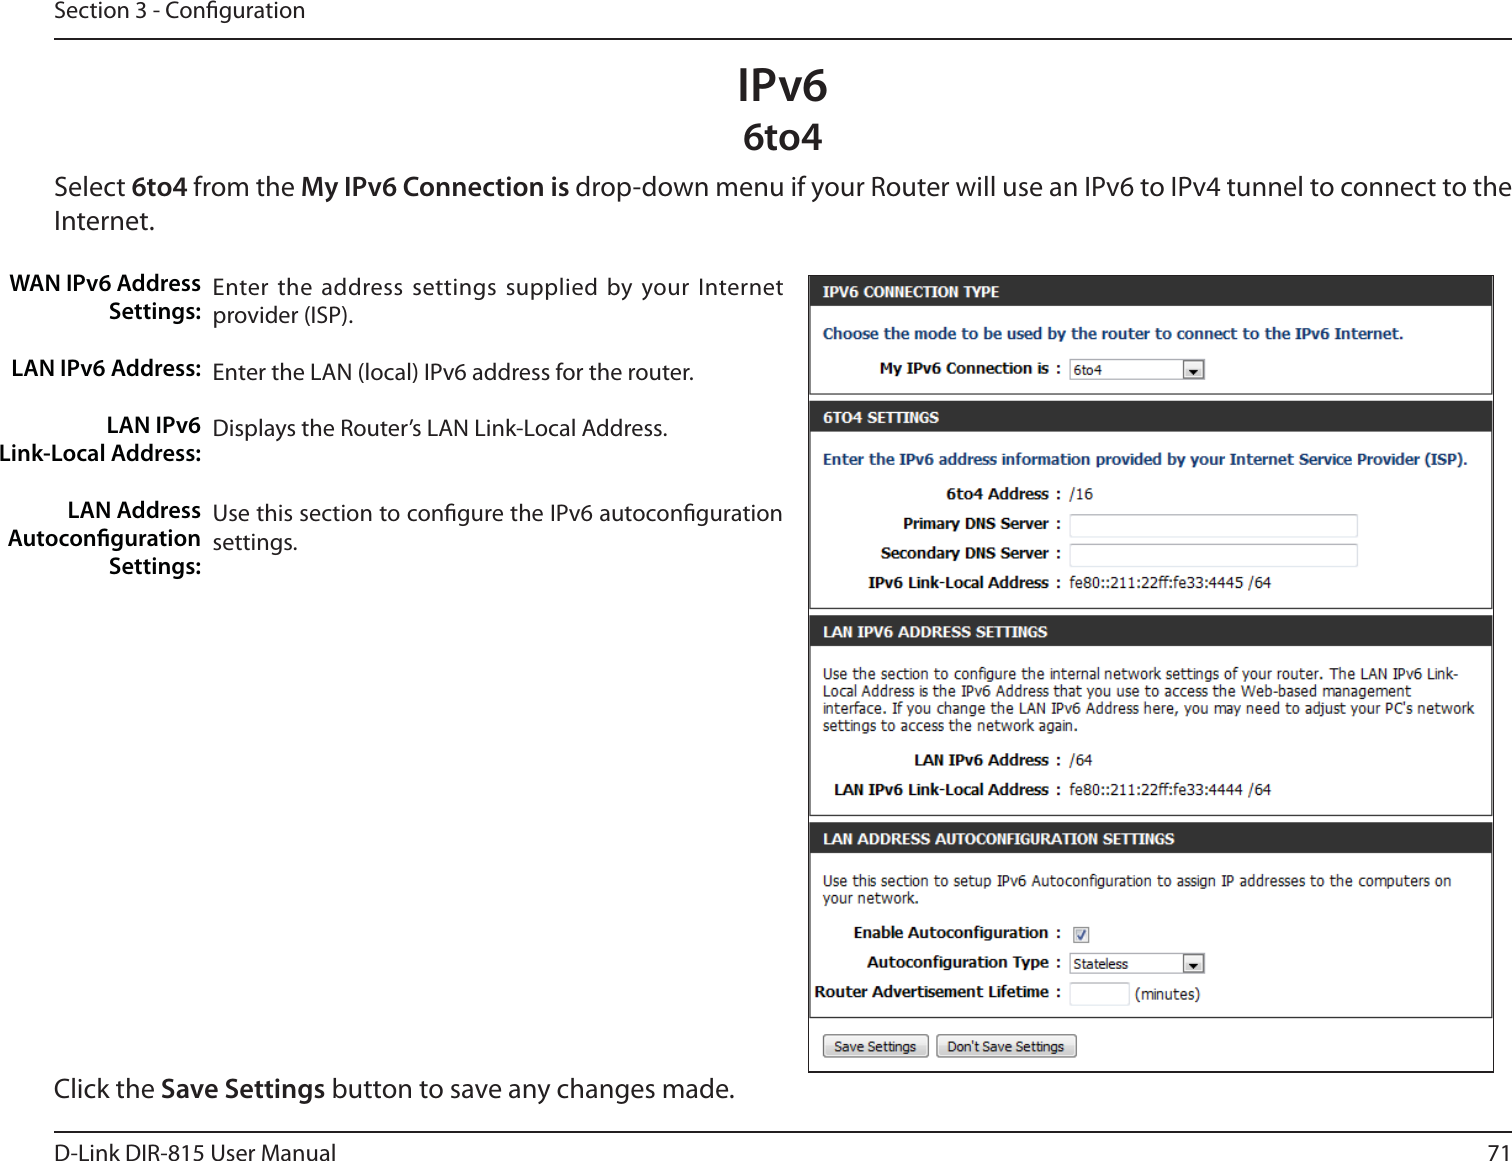 71D-Link DIR-815 User ManualSection 3 - CongurationIPv66to4Select 6to4 from the My IPv6 Connection is drop-down menu if your Router will use an IPv6 to IPv4 tunnel to connect to the Internet.Enter the address settings supplied by your Internet provider (ISP). Enter the LAN (local) IPv6 address for the router. Displays the Router’s LAN Link-Local Address.Use this section to congure the IPv6 autoconguration settings.WAN IPv6 Address Settings:LAN IPv6 Address:LAN IPv6  Link-Local Address:LAN Address Autoconguration Settings:Click the Save Settings button to save any changes made.